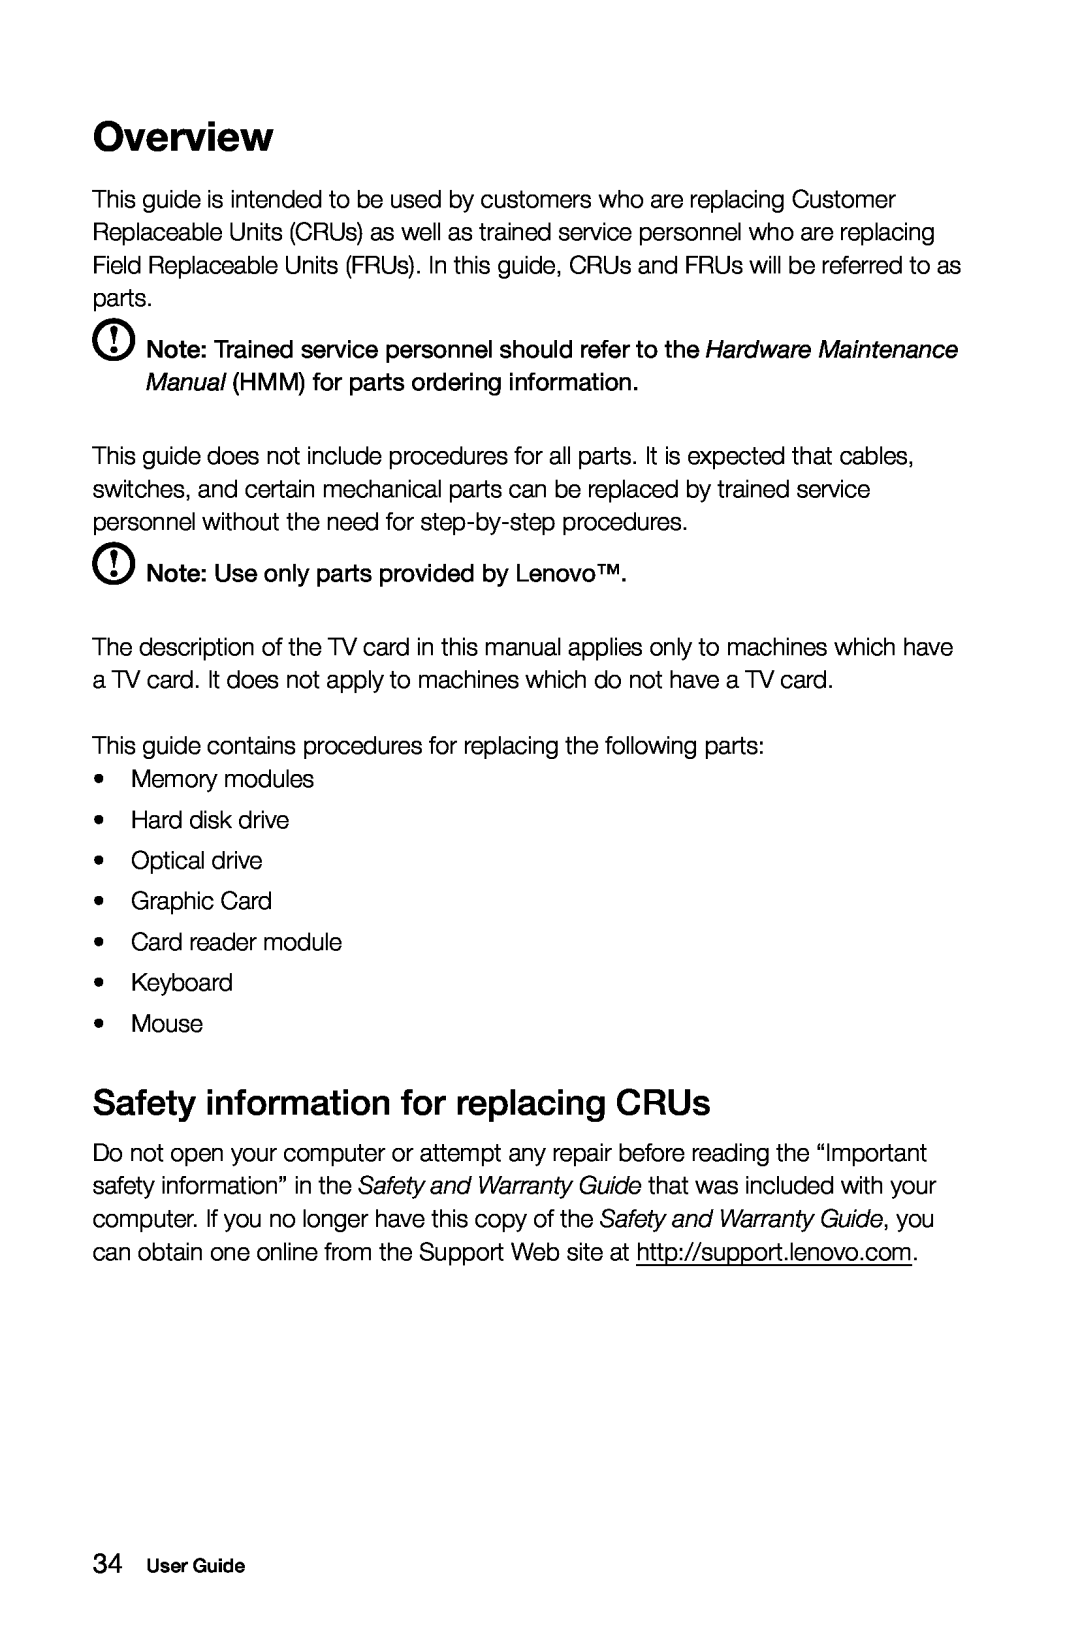 Lenovo 57321302 manual Overview, Safety information for replacing CRUs 